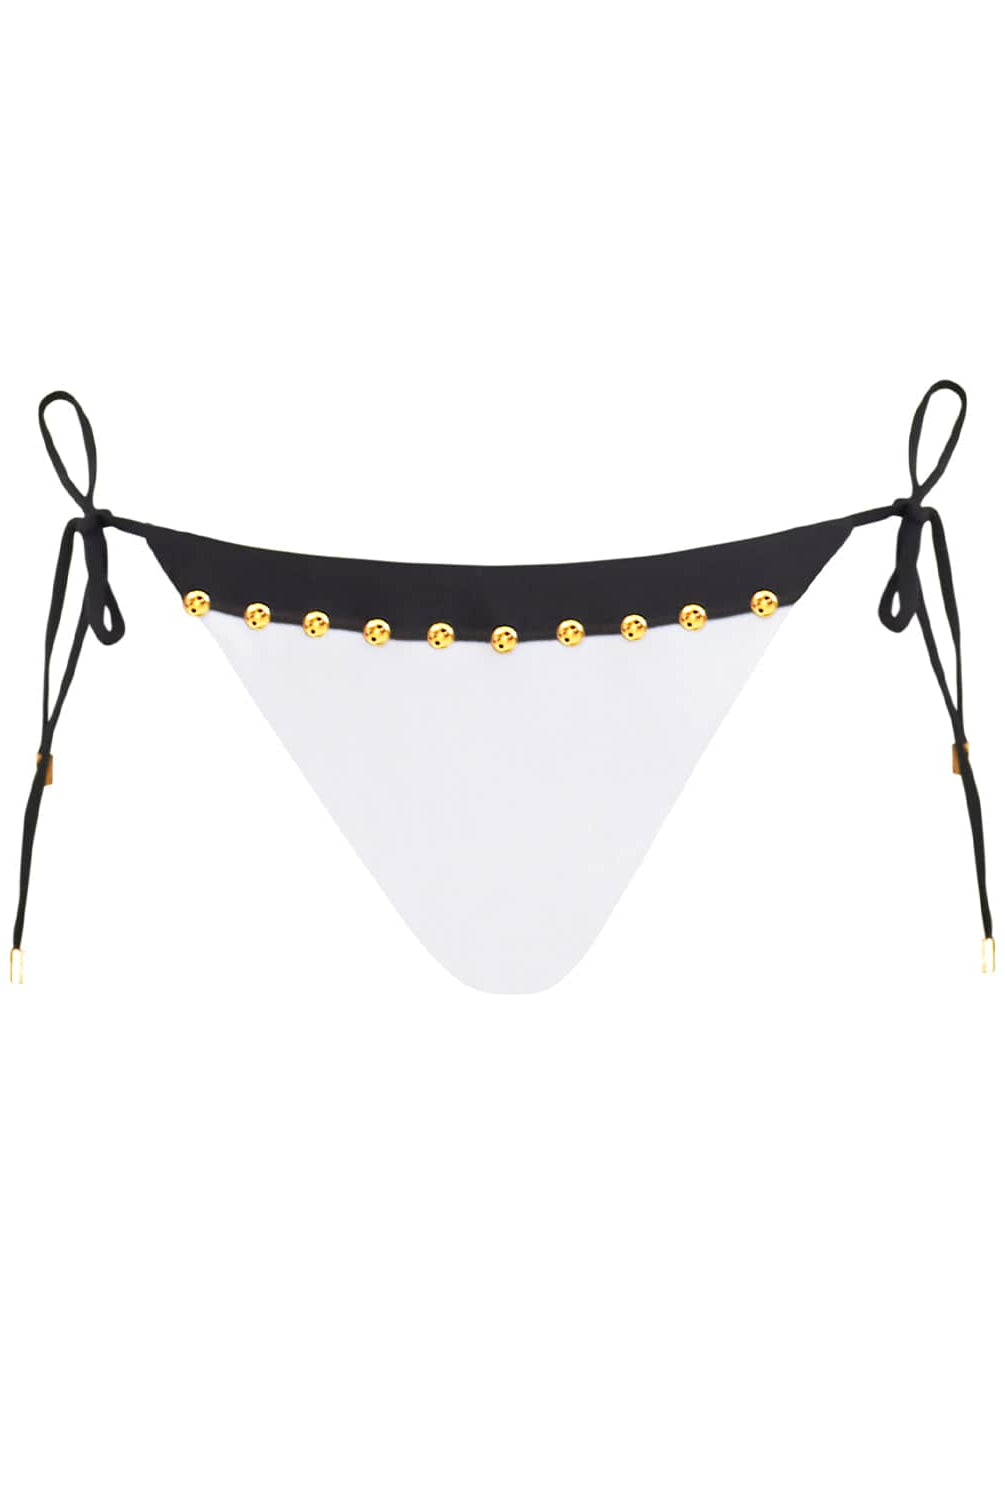 A black and white triangle bikini bottom with stud details. Featured against a white wall background.